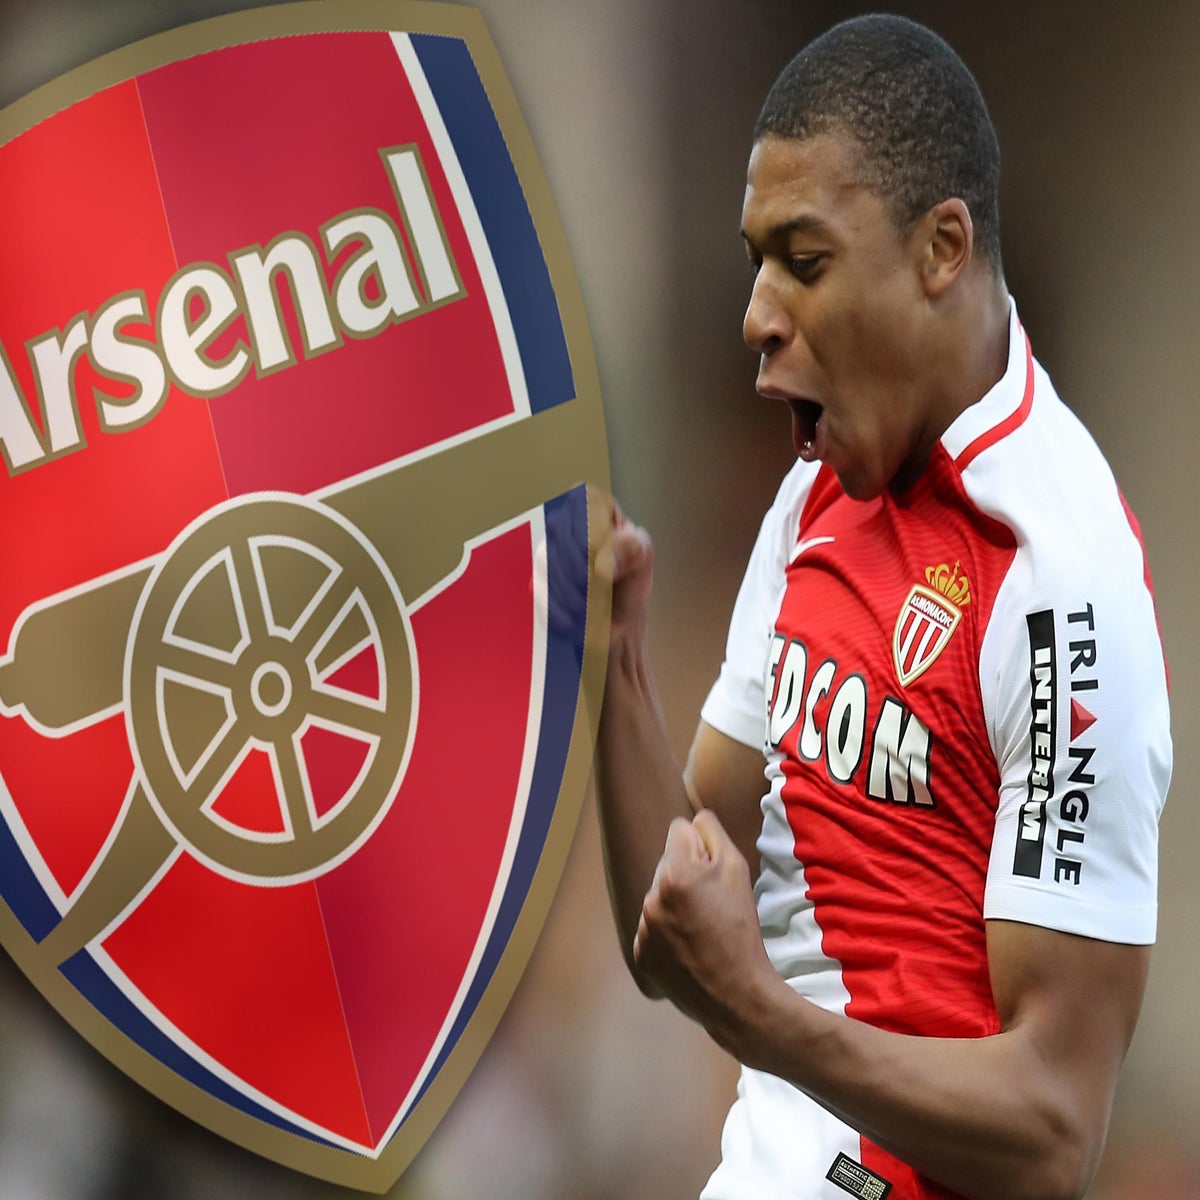 Arsenal and Liverpool fans told Kylian Mbappe only wants to join